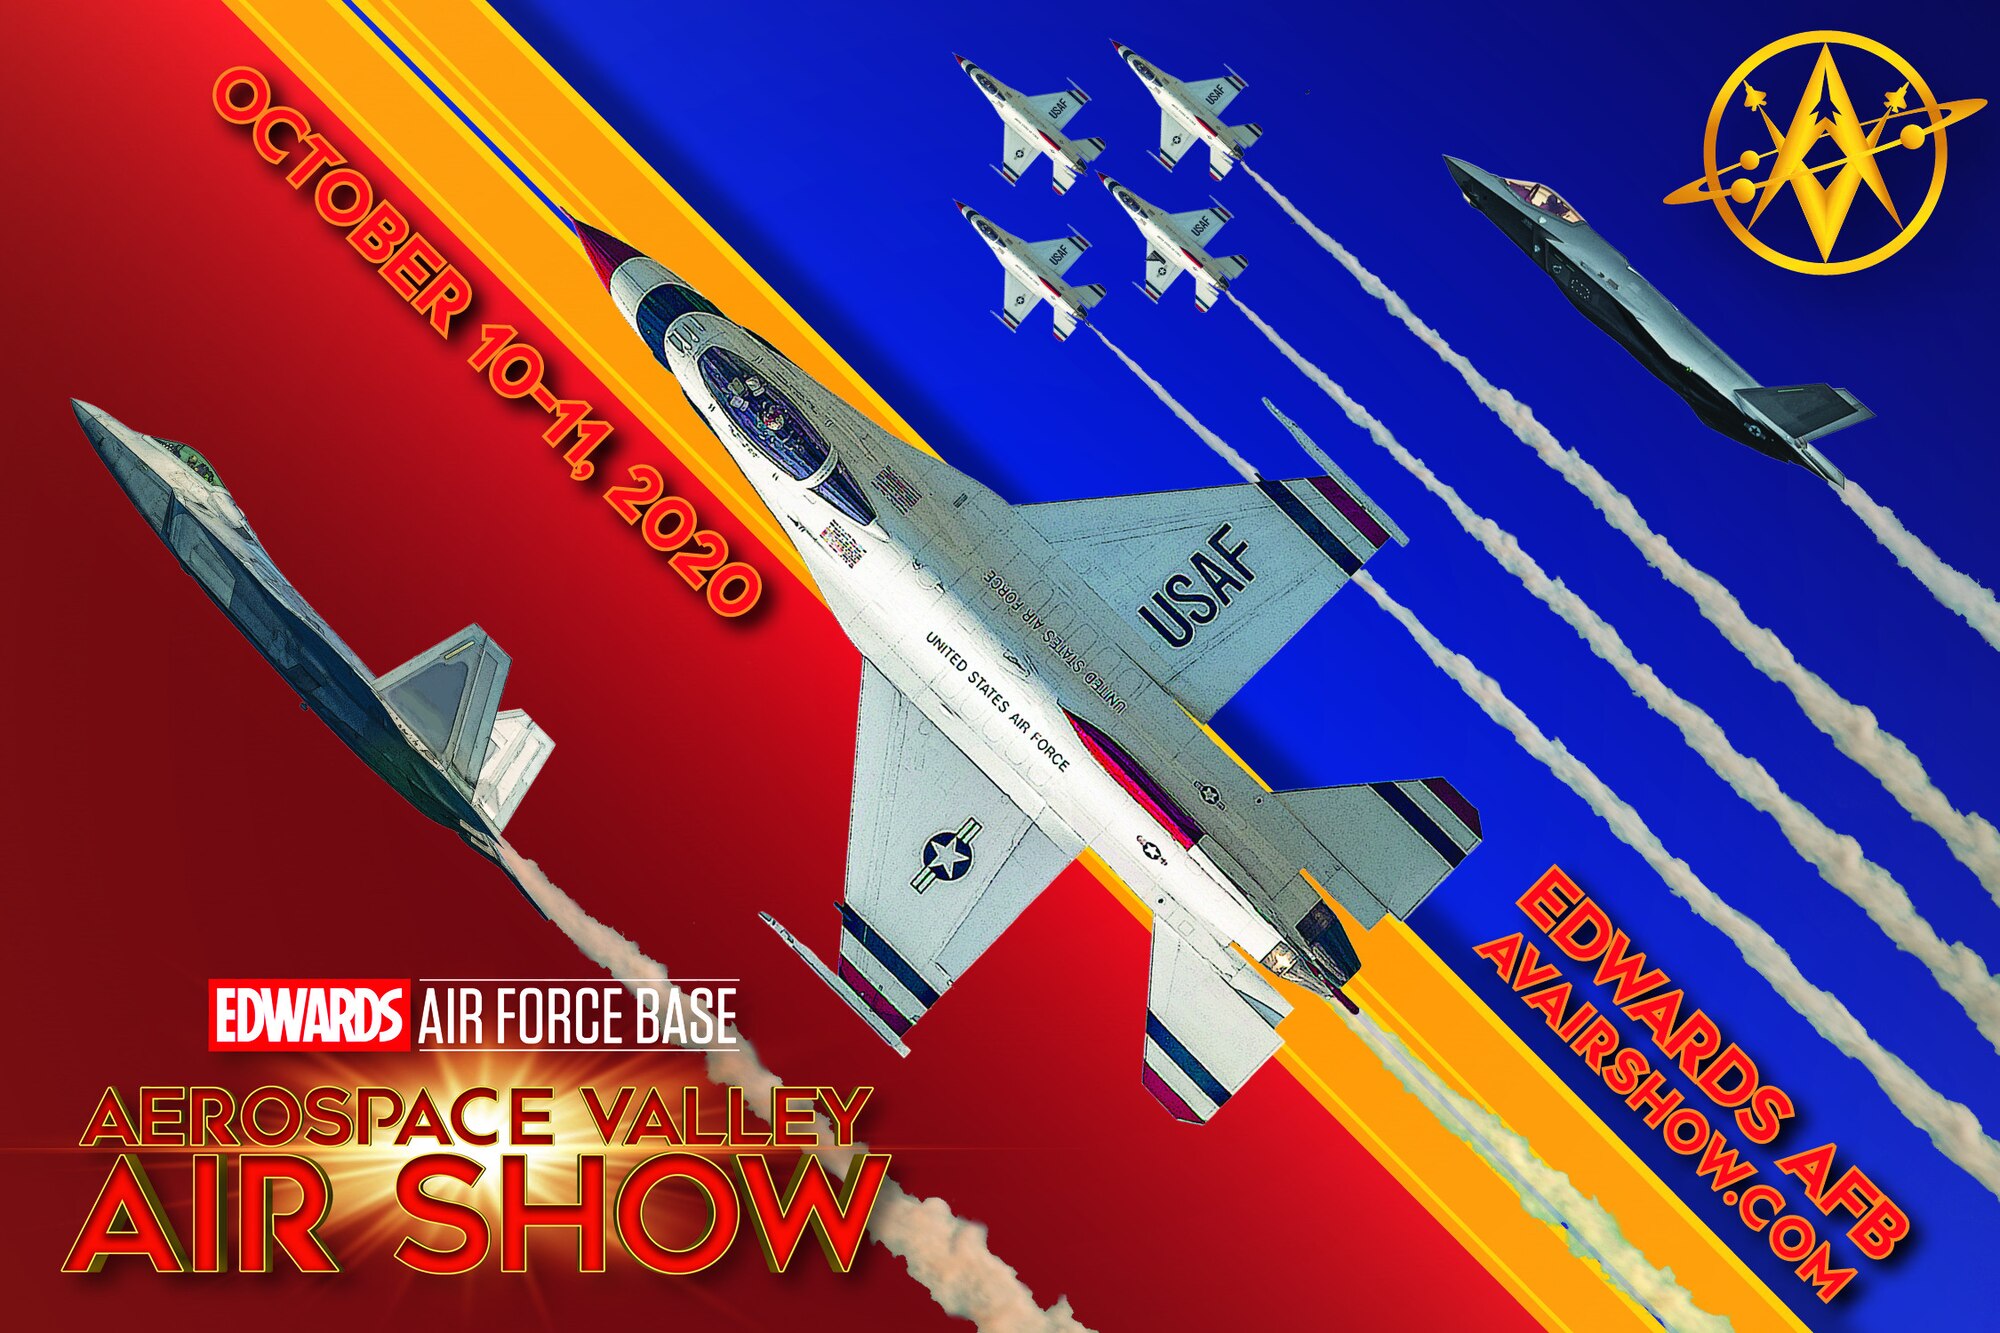 The 412th Test Wing commander, Brig. Gen. Matthew Higer, announced the 2020 Aerospace Valley Air Show in October will be a “hybrid event.” Higer announced the change to the airshow during a live-stream town hall, June 19.